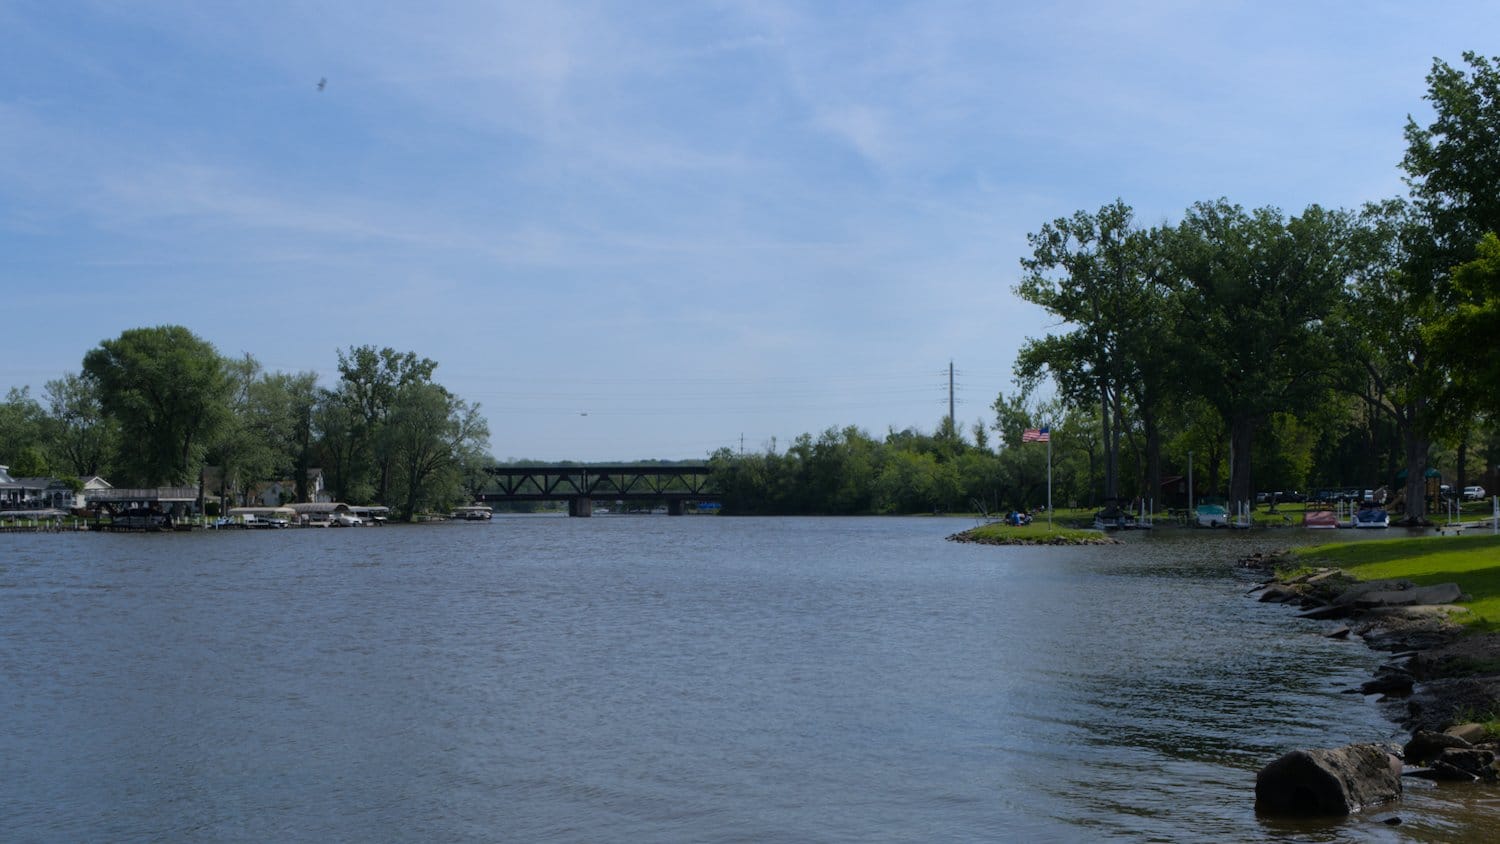 Looking north at the Fox River toward Lions Park and the train bridge.